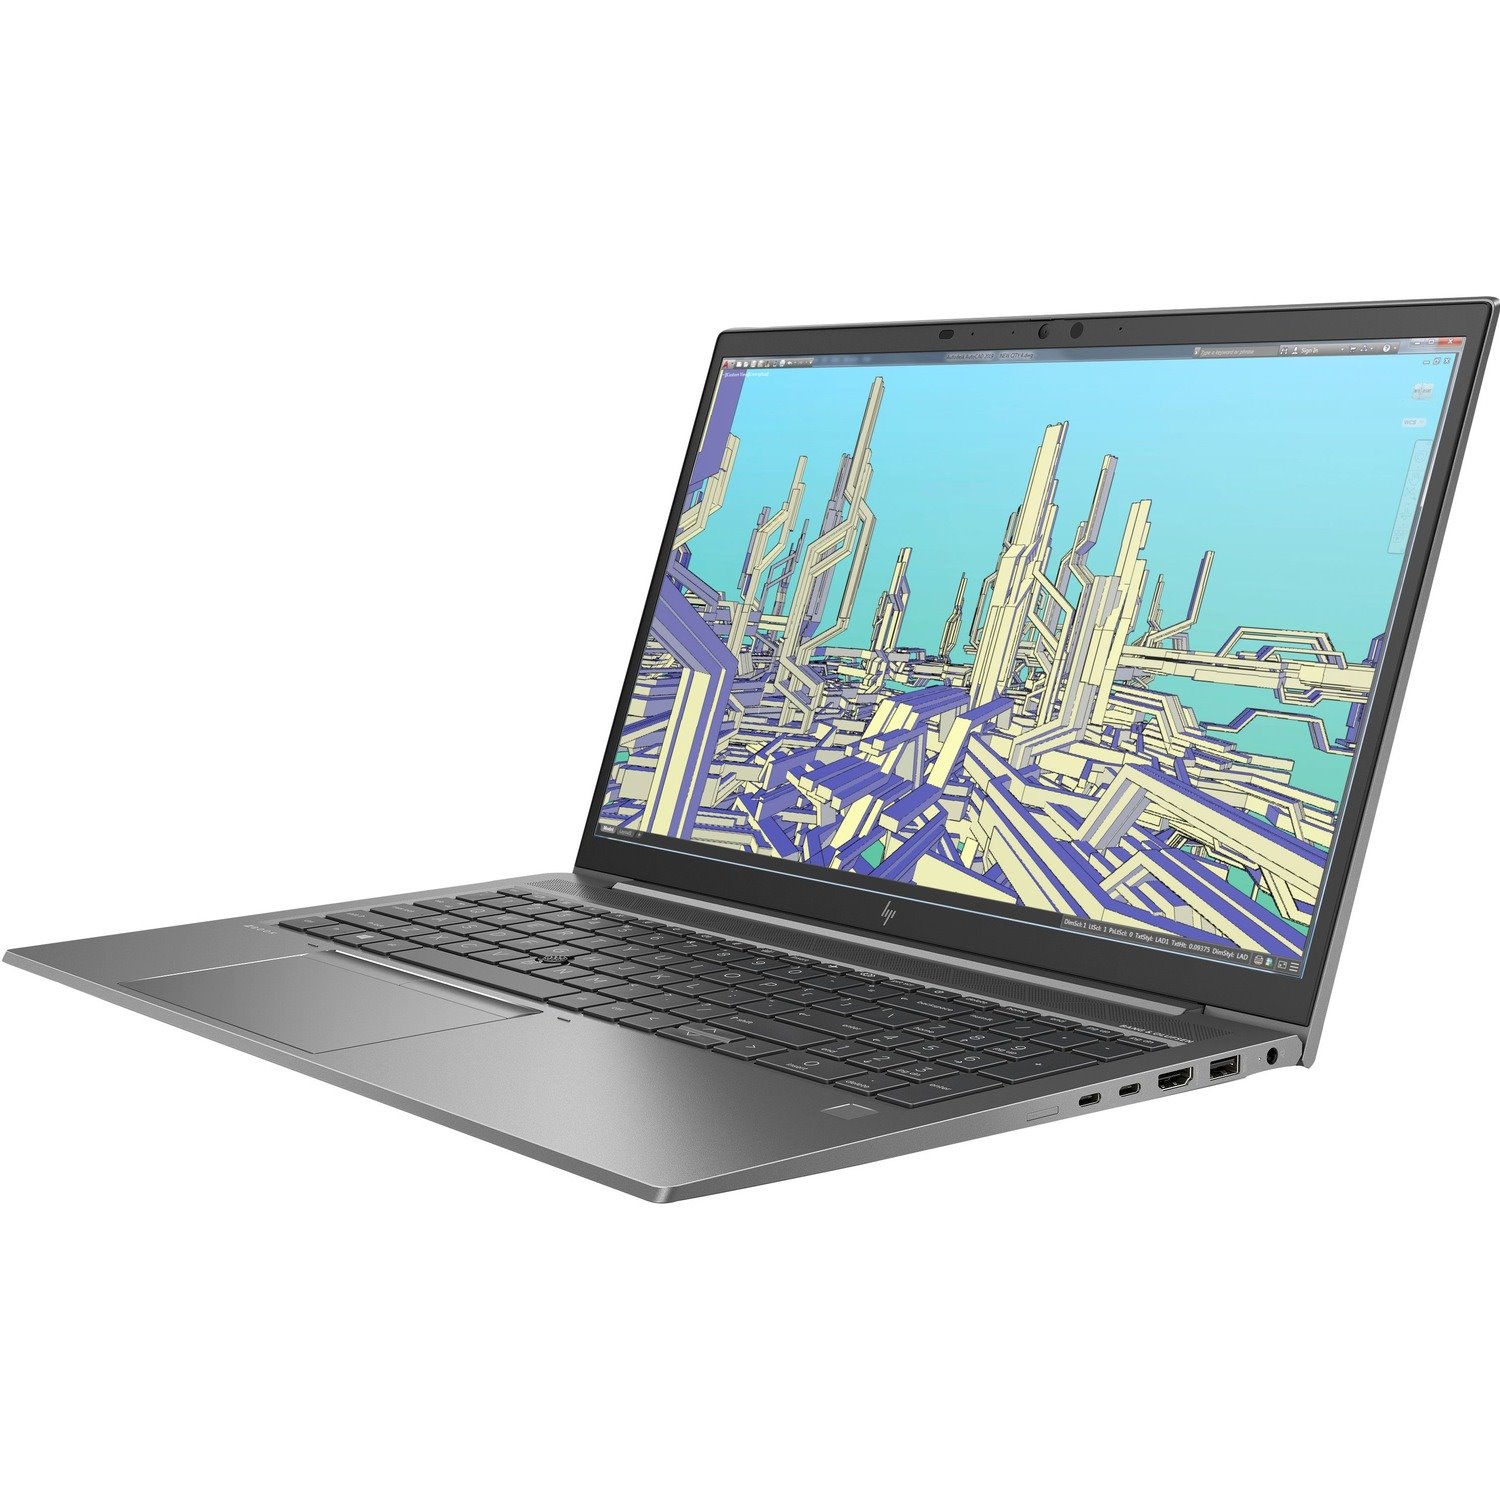 HP ZBook Firefly G8 39.6 cm (15.6") Touchscreen Mobile Workstation - Full HD - 1920 x 1080 - Intel Core i5 11th Gen i5-1135G7 Quad-core (4 Core) - 16 GB Total RAM - 512 GB SSD